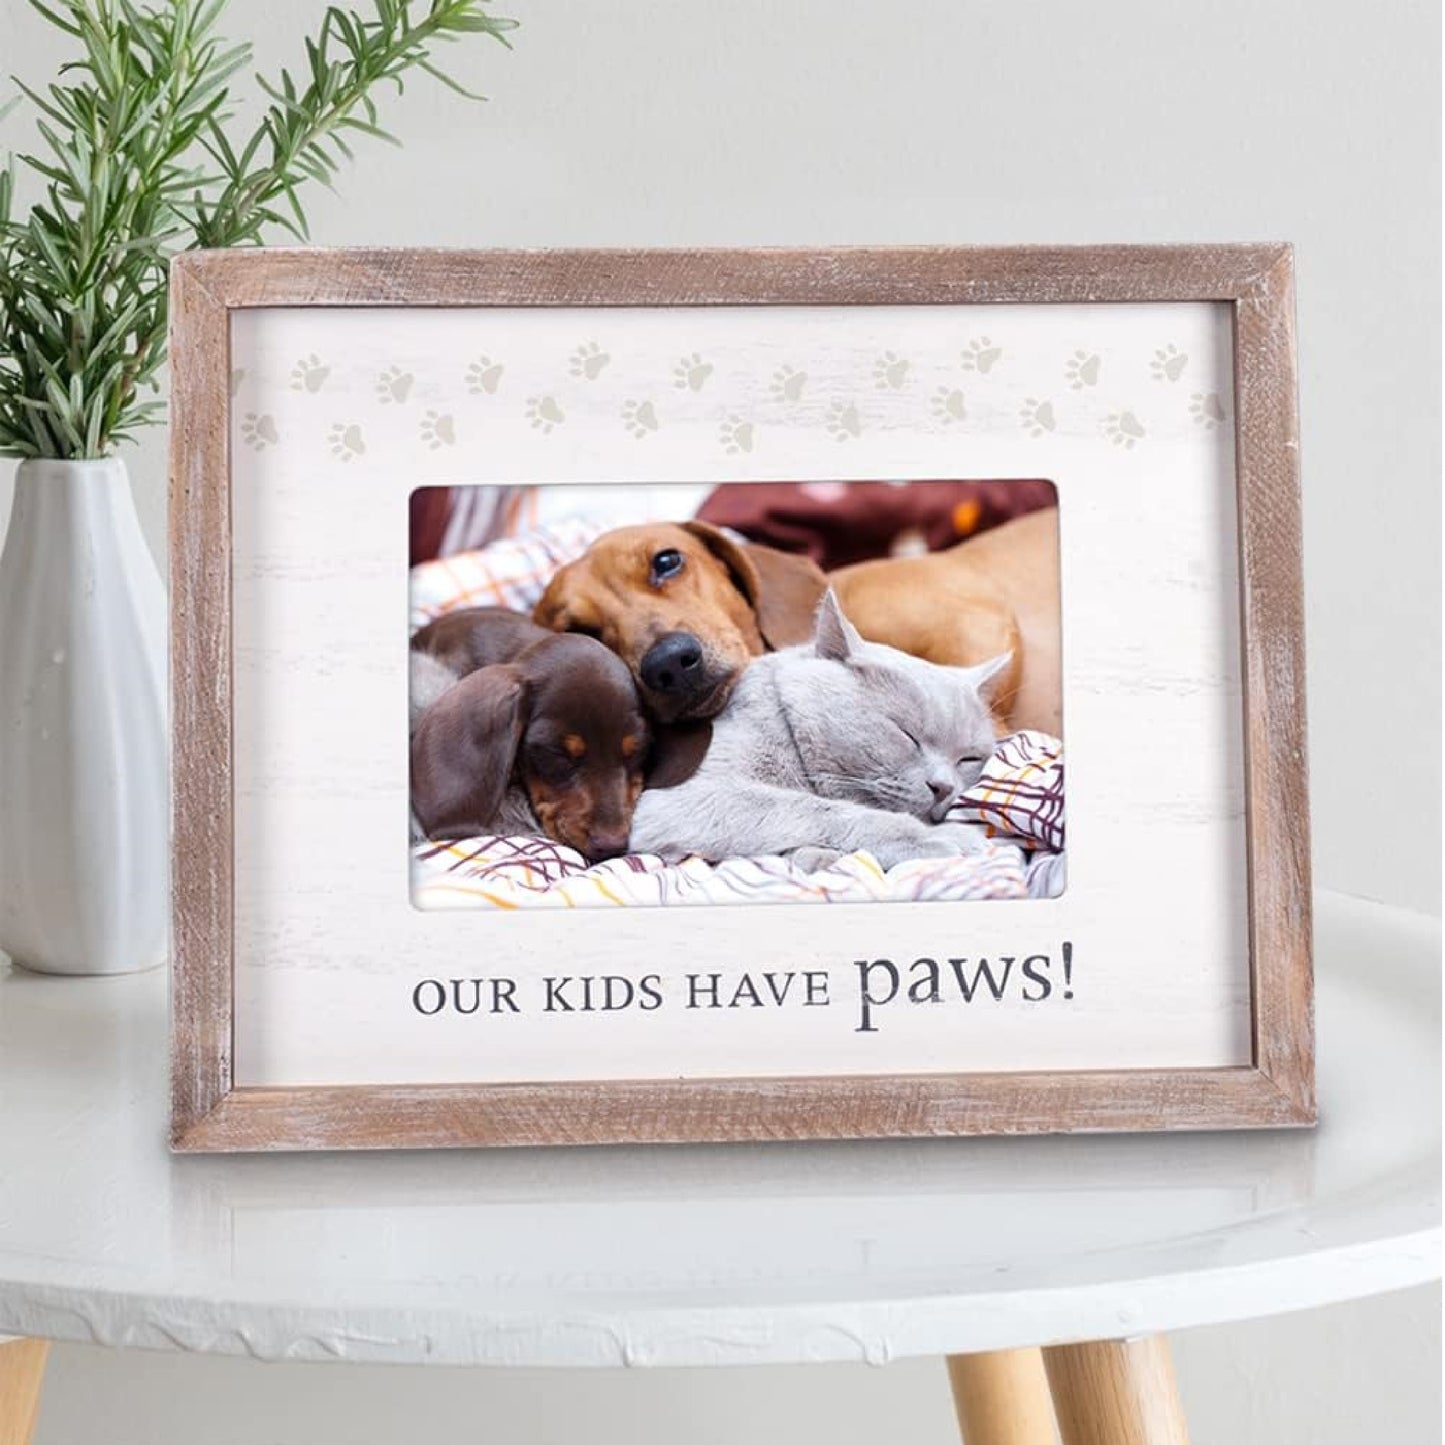 Malden "OUR KIDS HAVE paws!" Pet Rustic Border Picture Frame